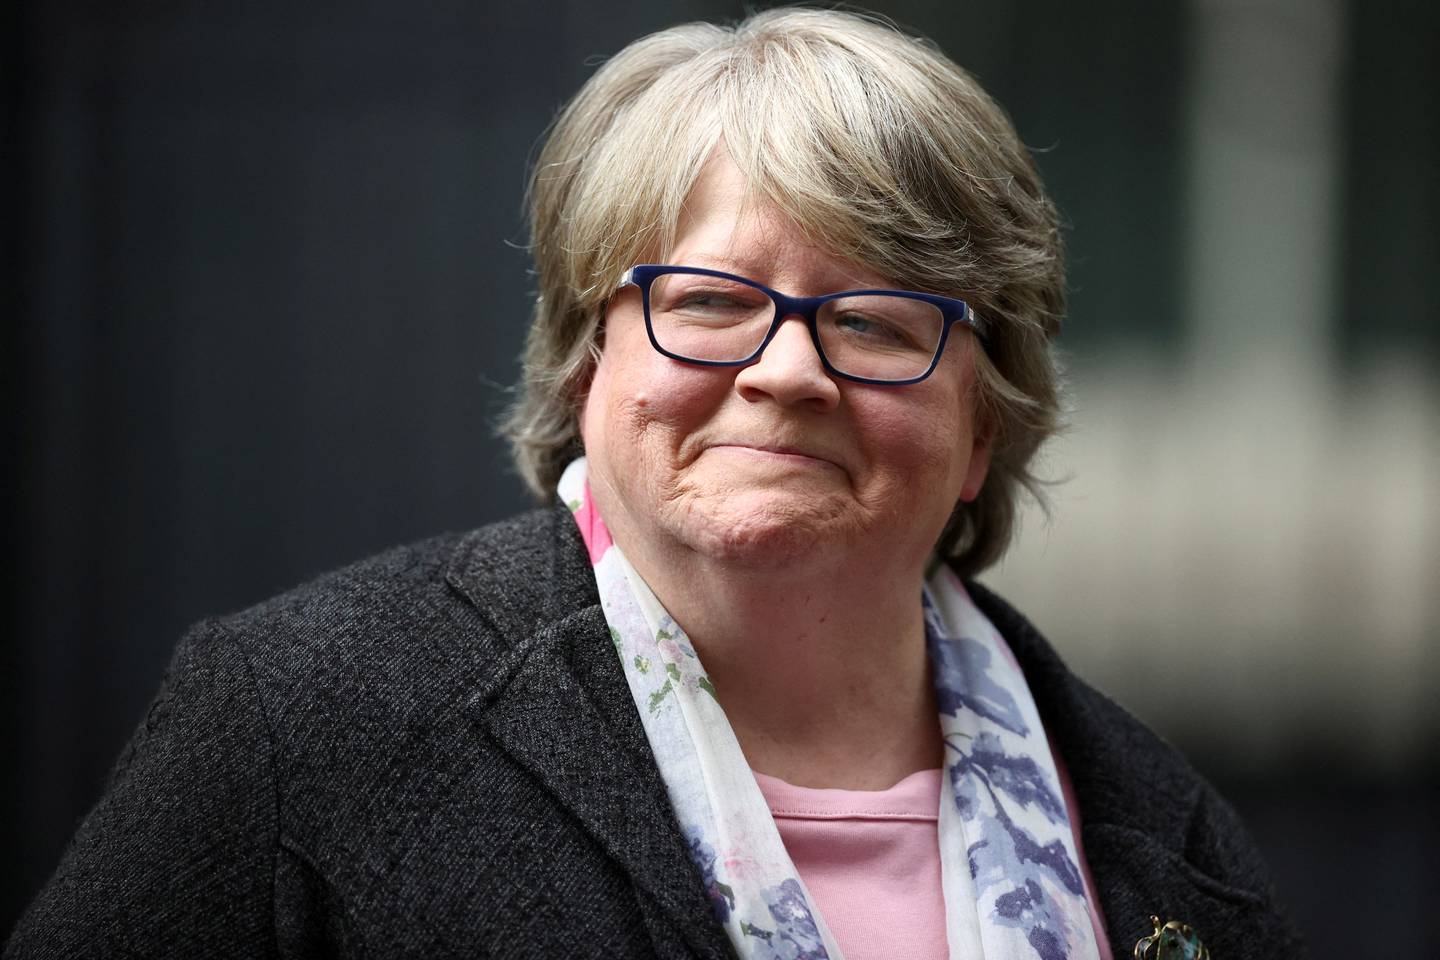 Newly appointed Health Secretary Therese Coffey said the changes would reduce the burden on GPs, freeing them up to see more patients. Reuters